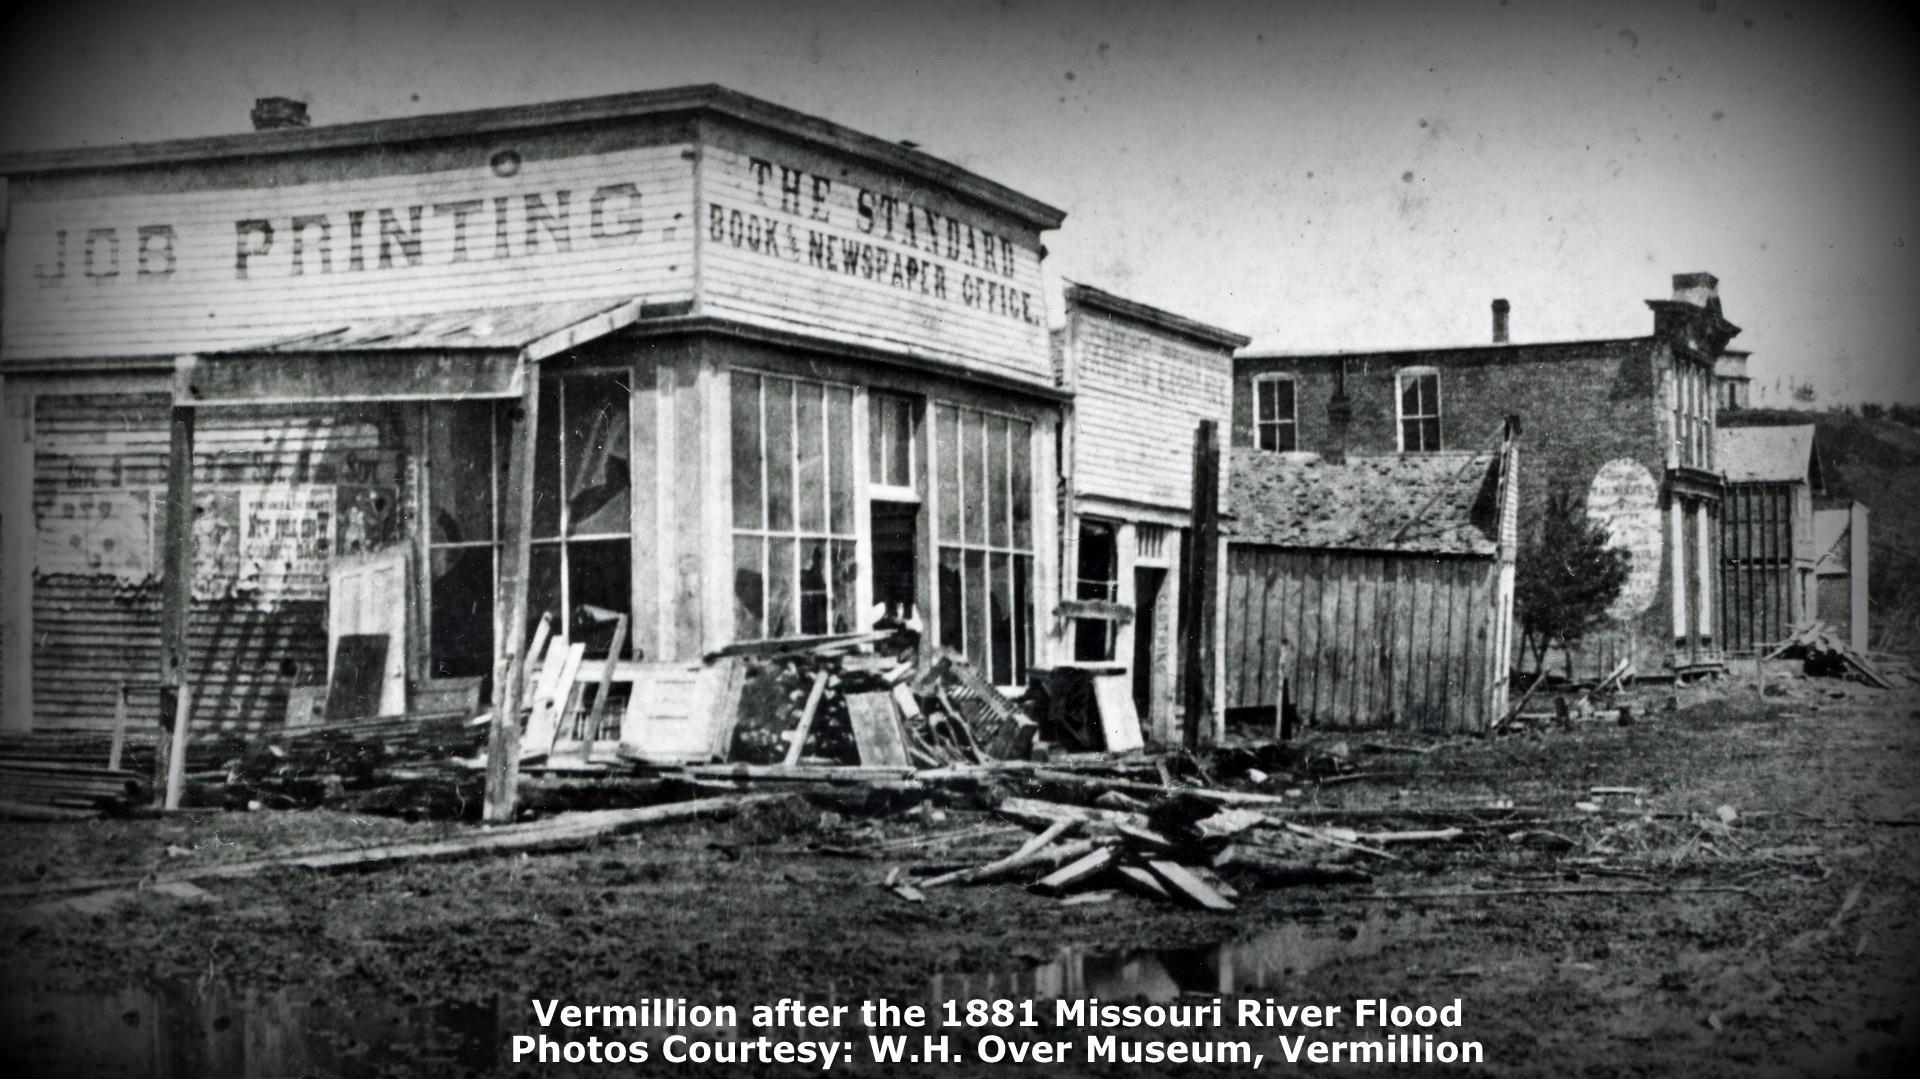 Damage shown to buildings after the 1881 flood in Vermilion, SD. 